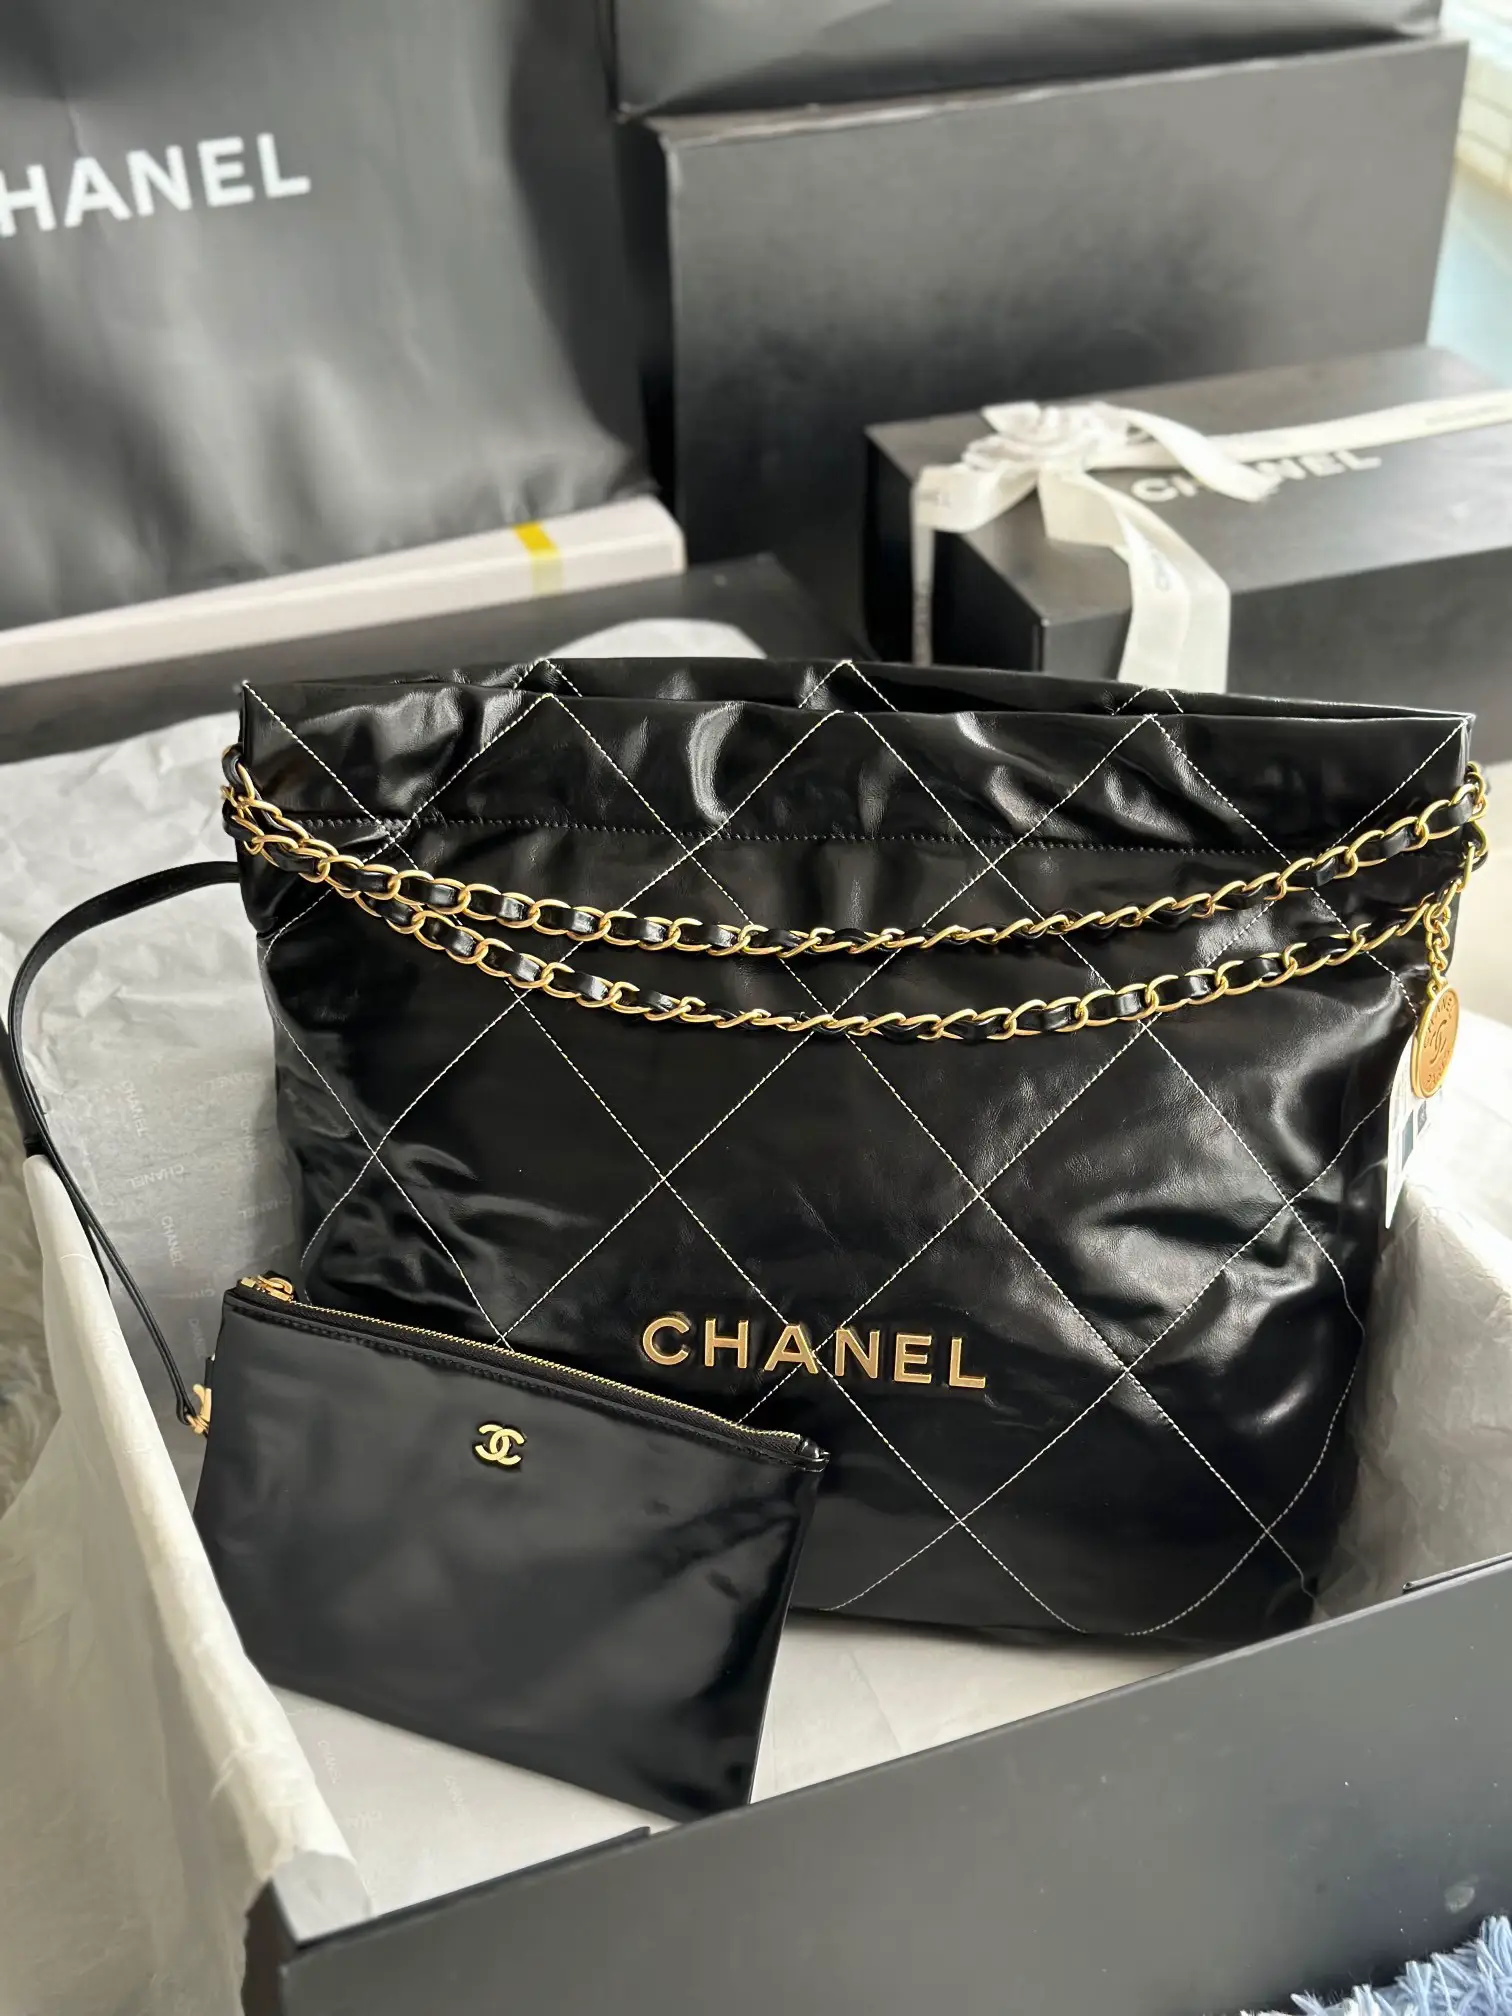 Chanel bag, Gallery posted by alfred karathri